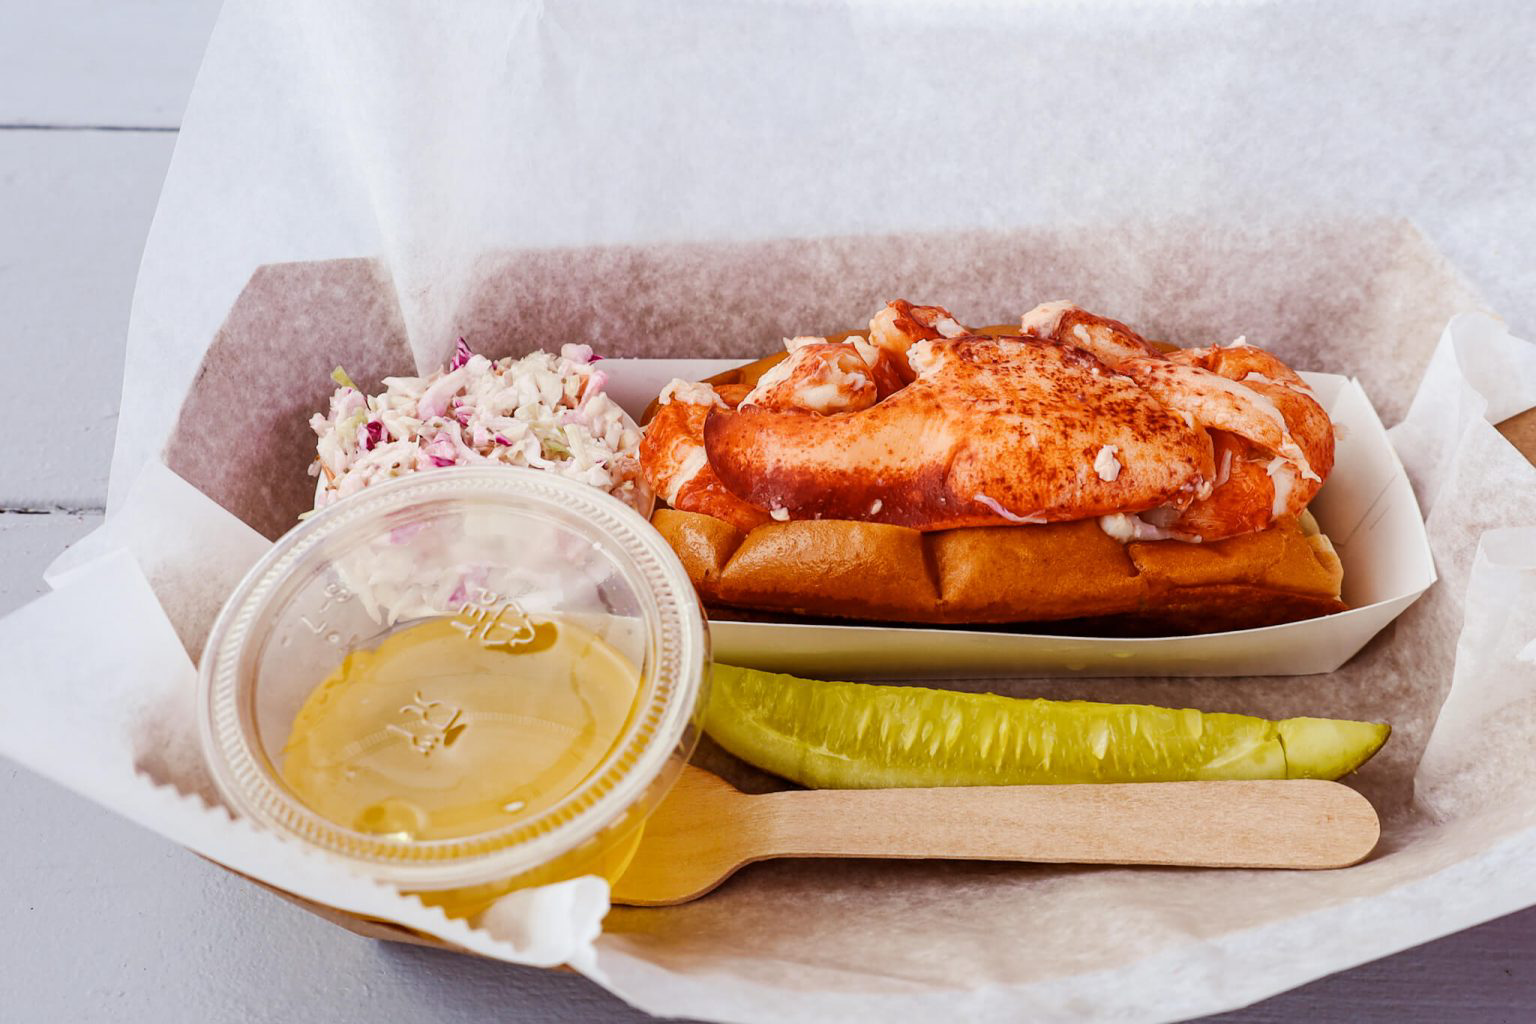 A lobster roll served with coleslaw.